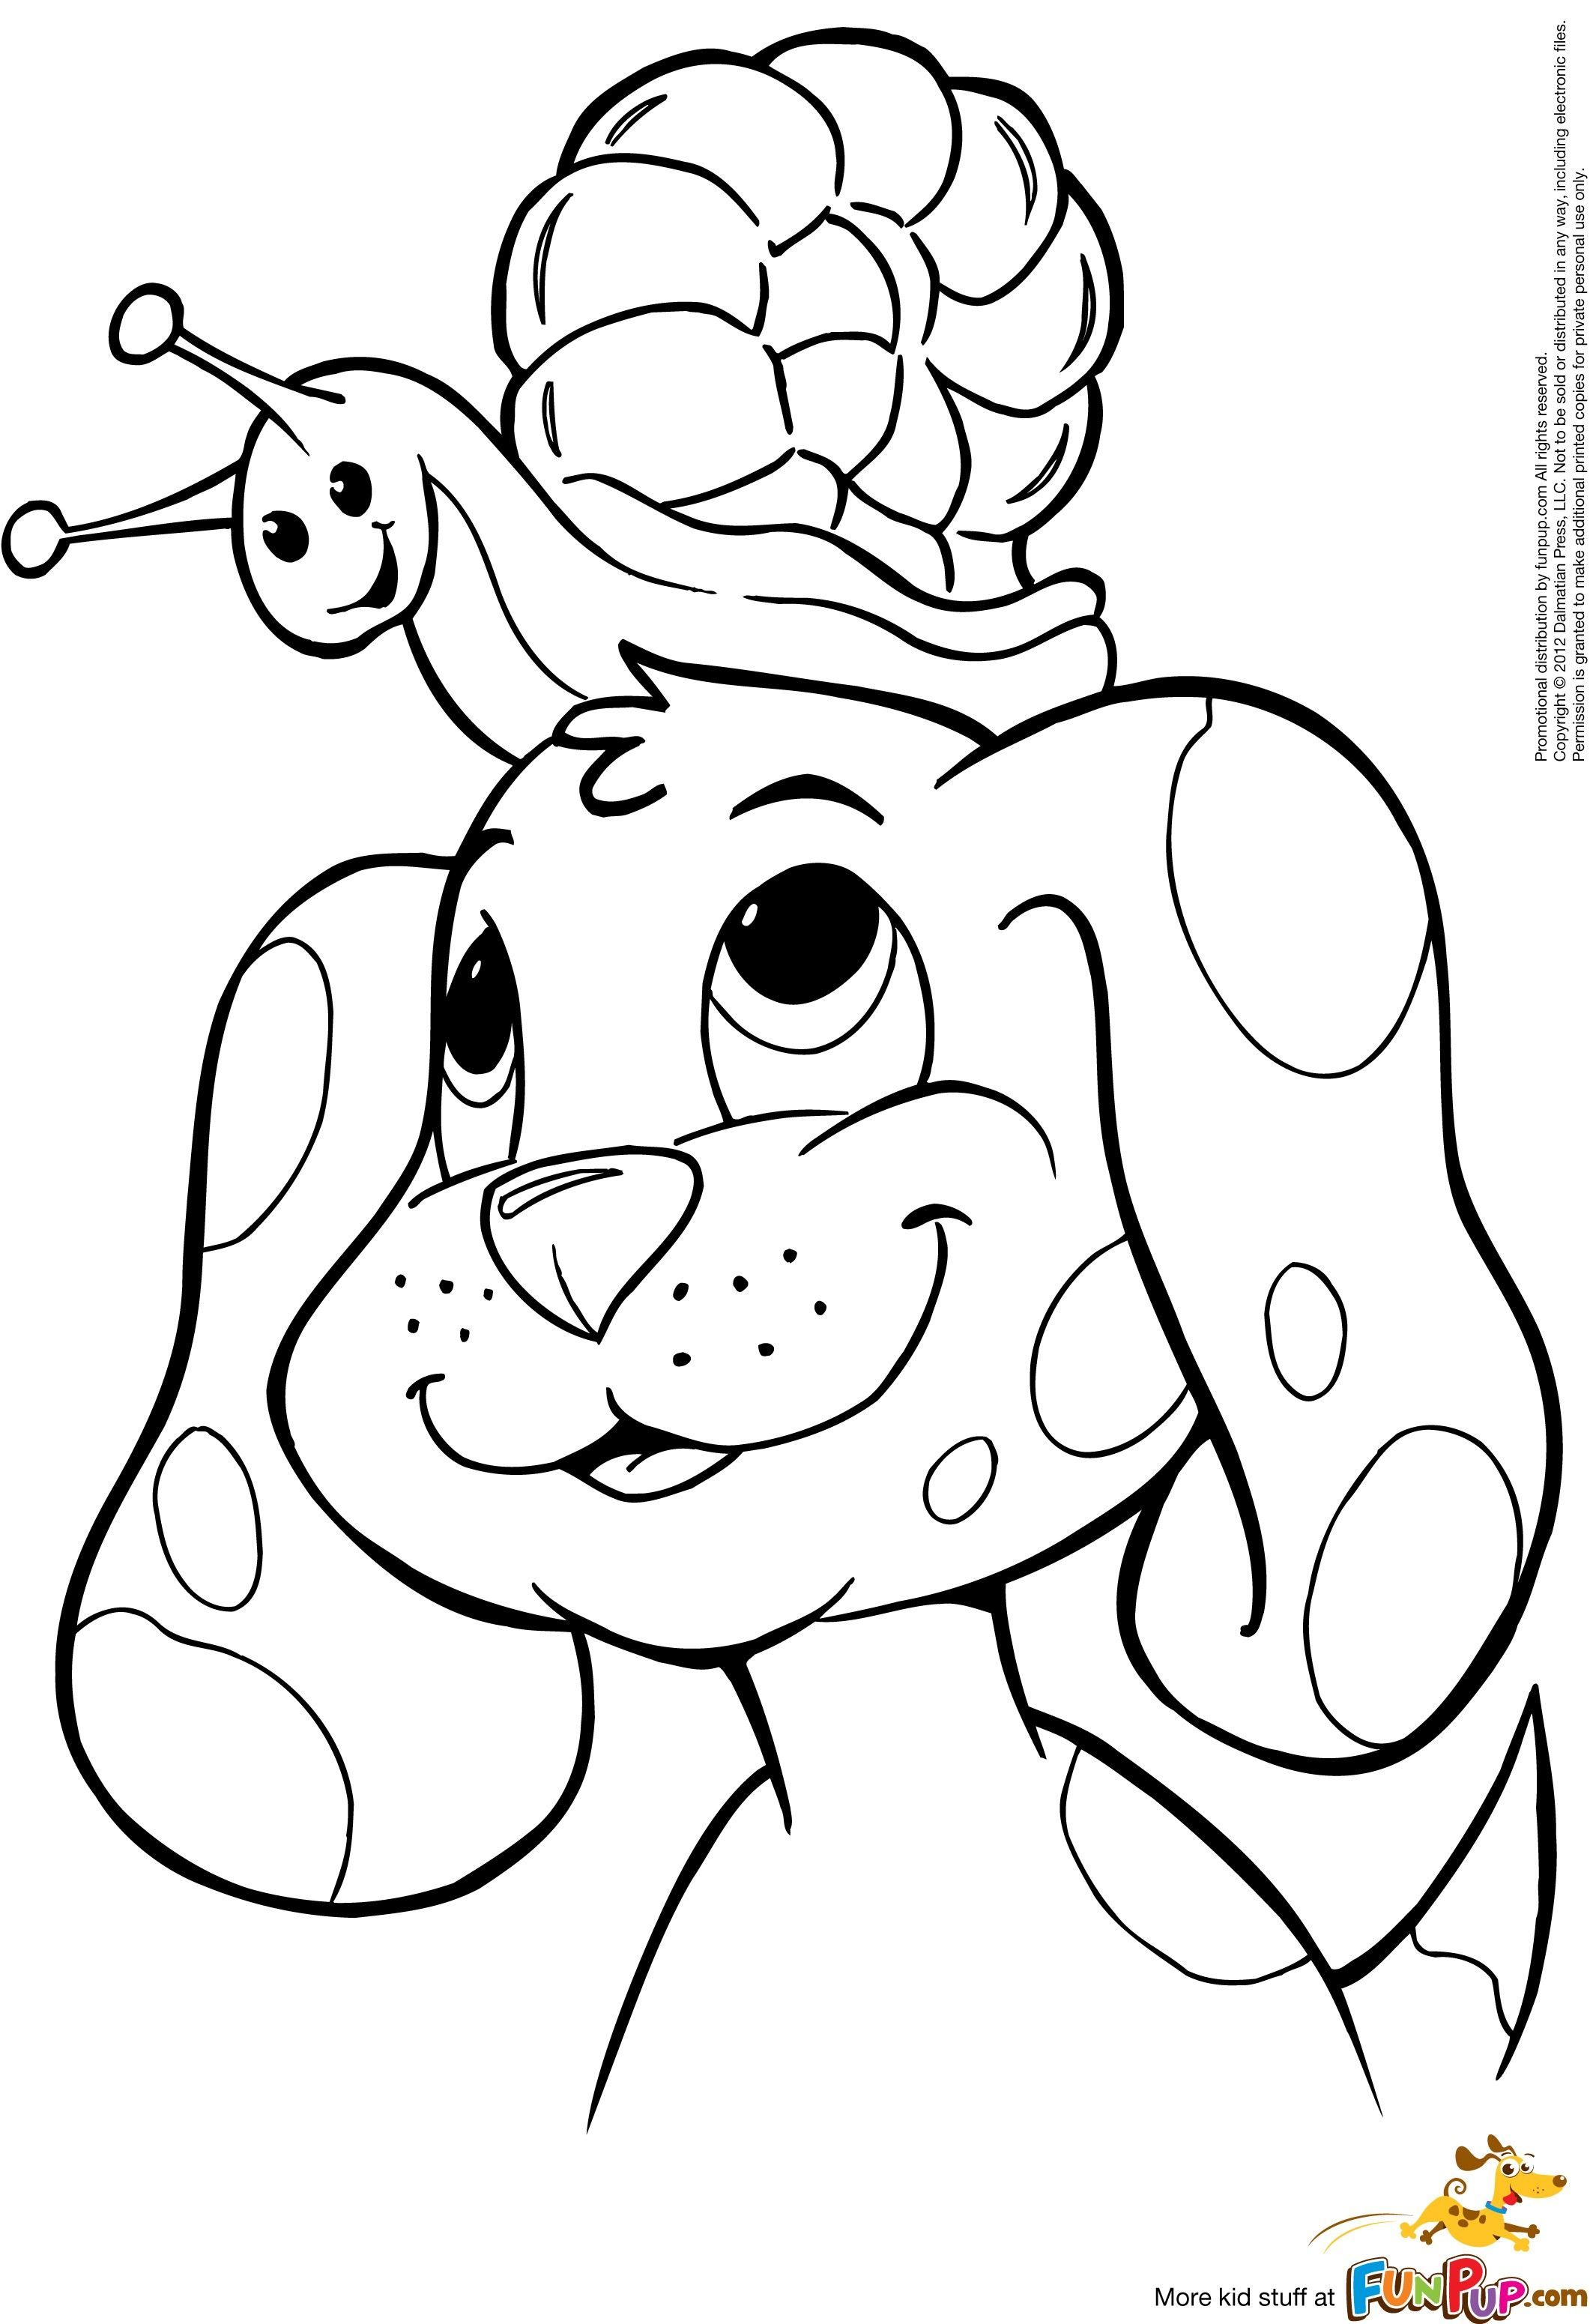 Printable Puppy Coloring Pages - Animal | Kids | Pinterest | Puppy - Free Coloring Pages Animals Printable